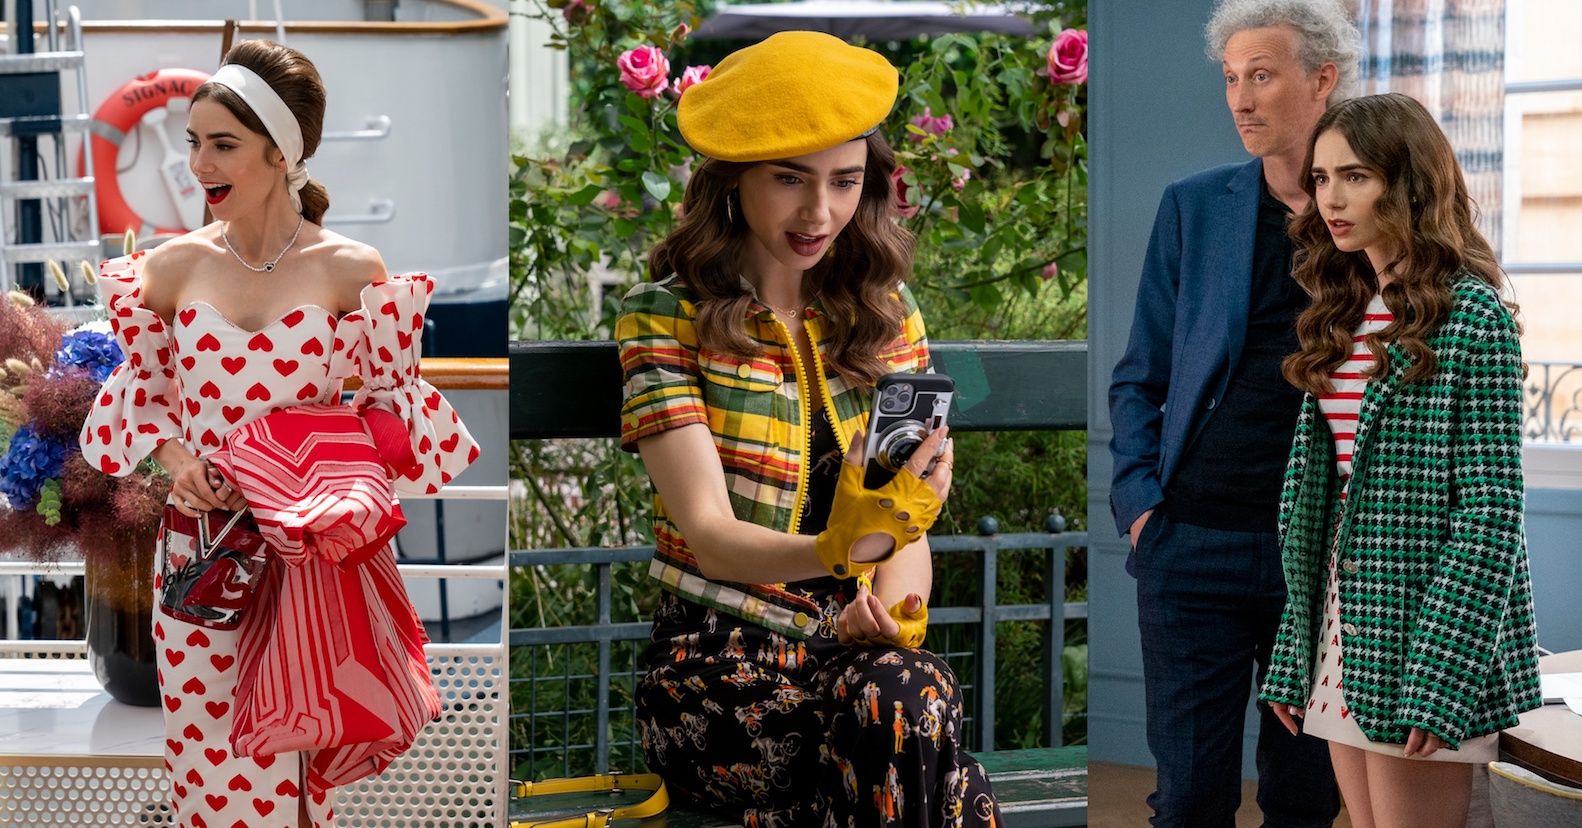 How to dress like Emily from ‘Emily In Paris’ season 2 (only better)